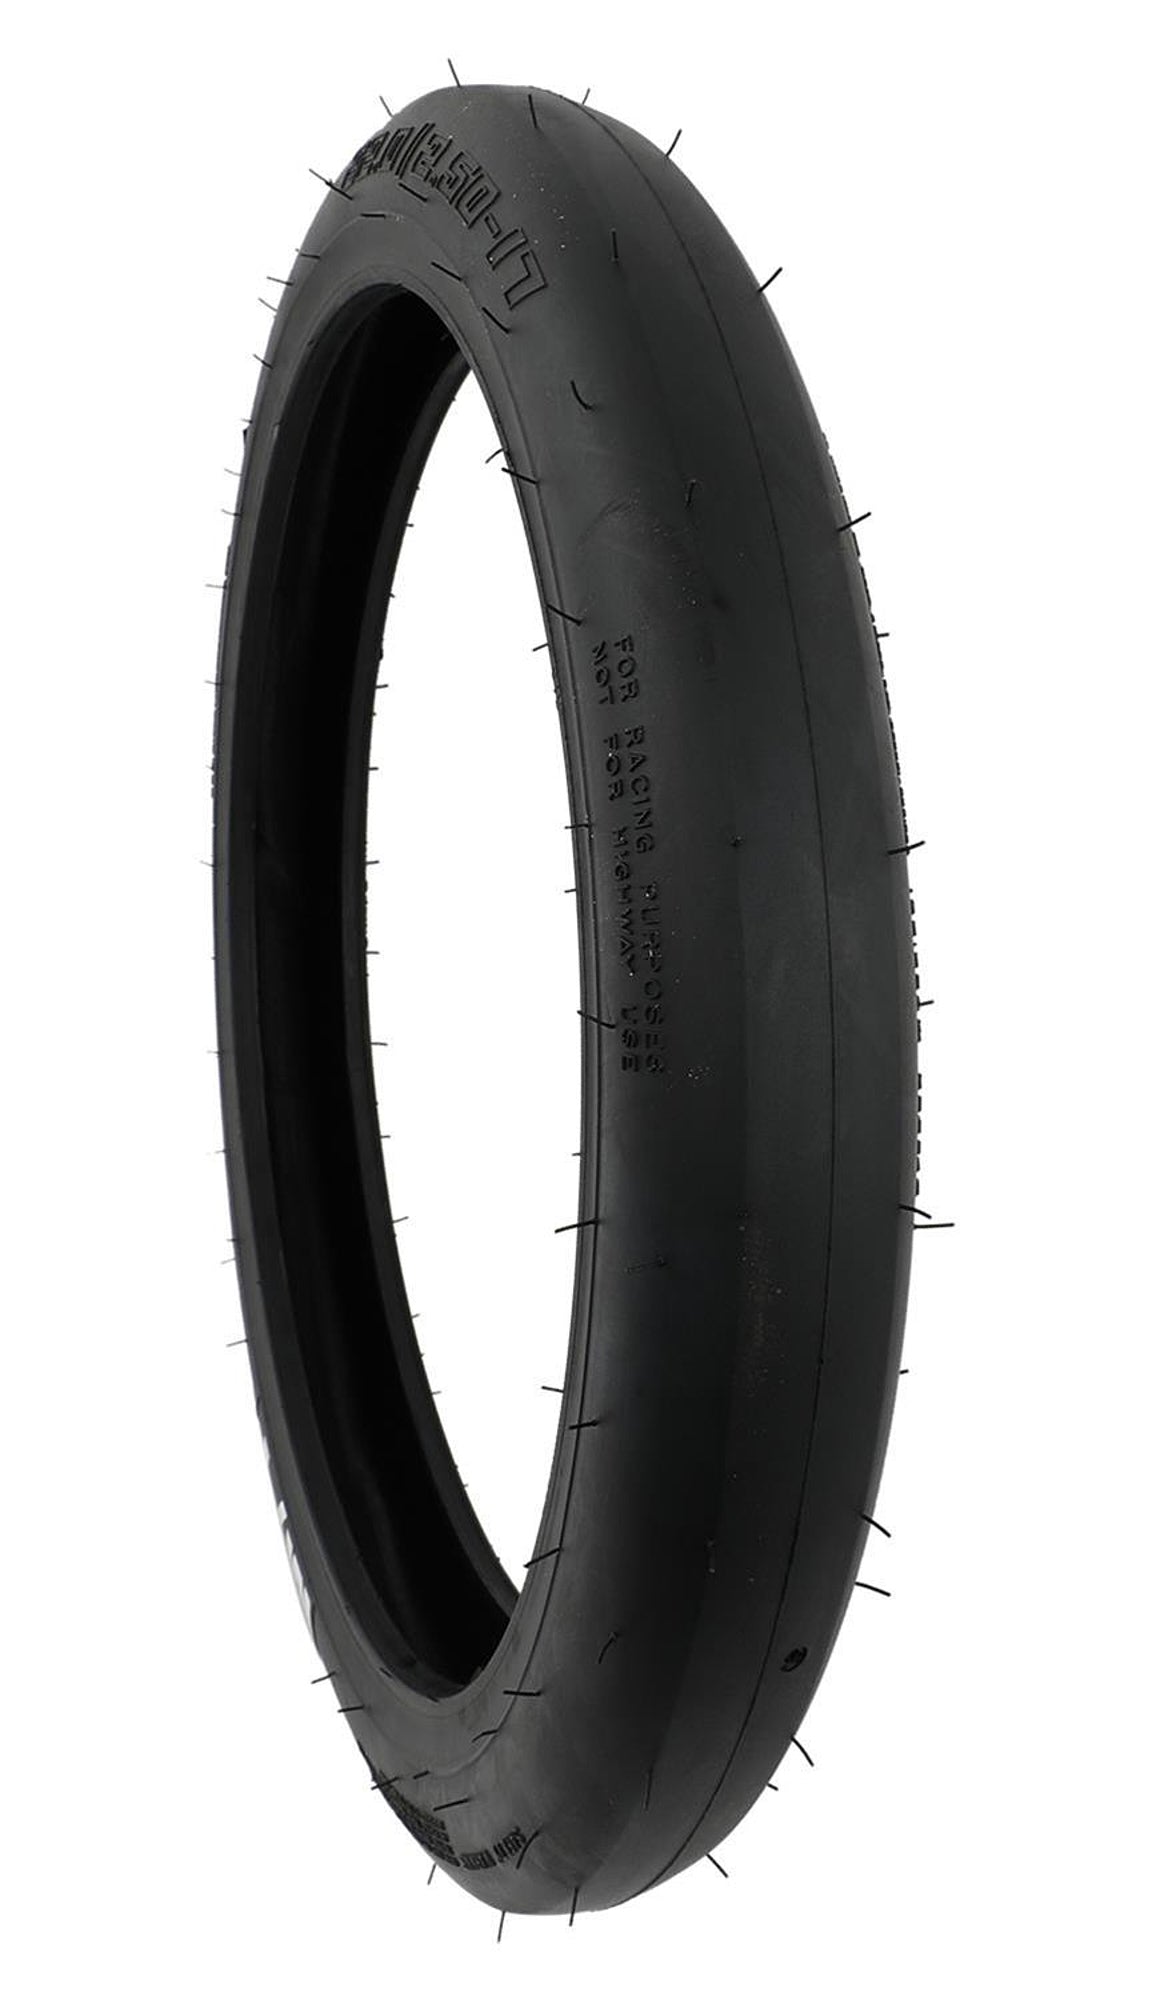 Mickey Thompson 22.0/2.5-17 ET Drag Front Tire Tires and Tubes Tires main image